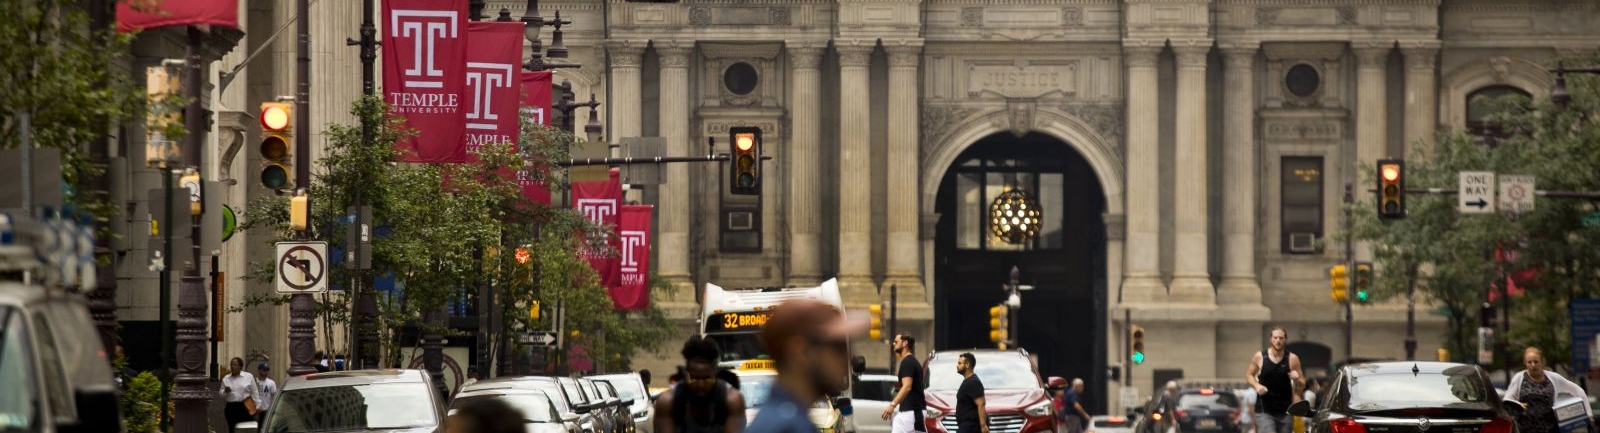 Temple University banners on Broad Street in front of Independence Hall in Philadelphia.